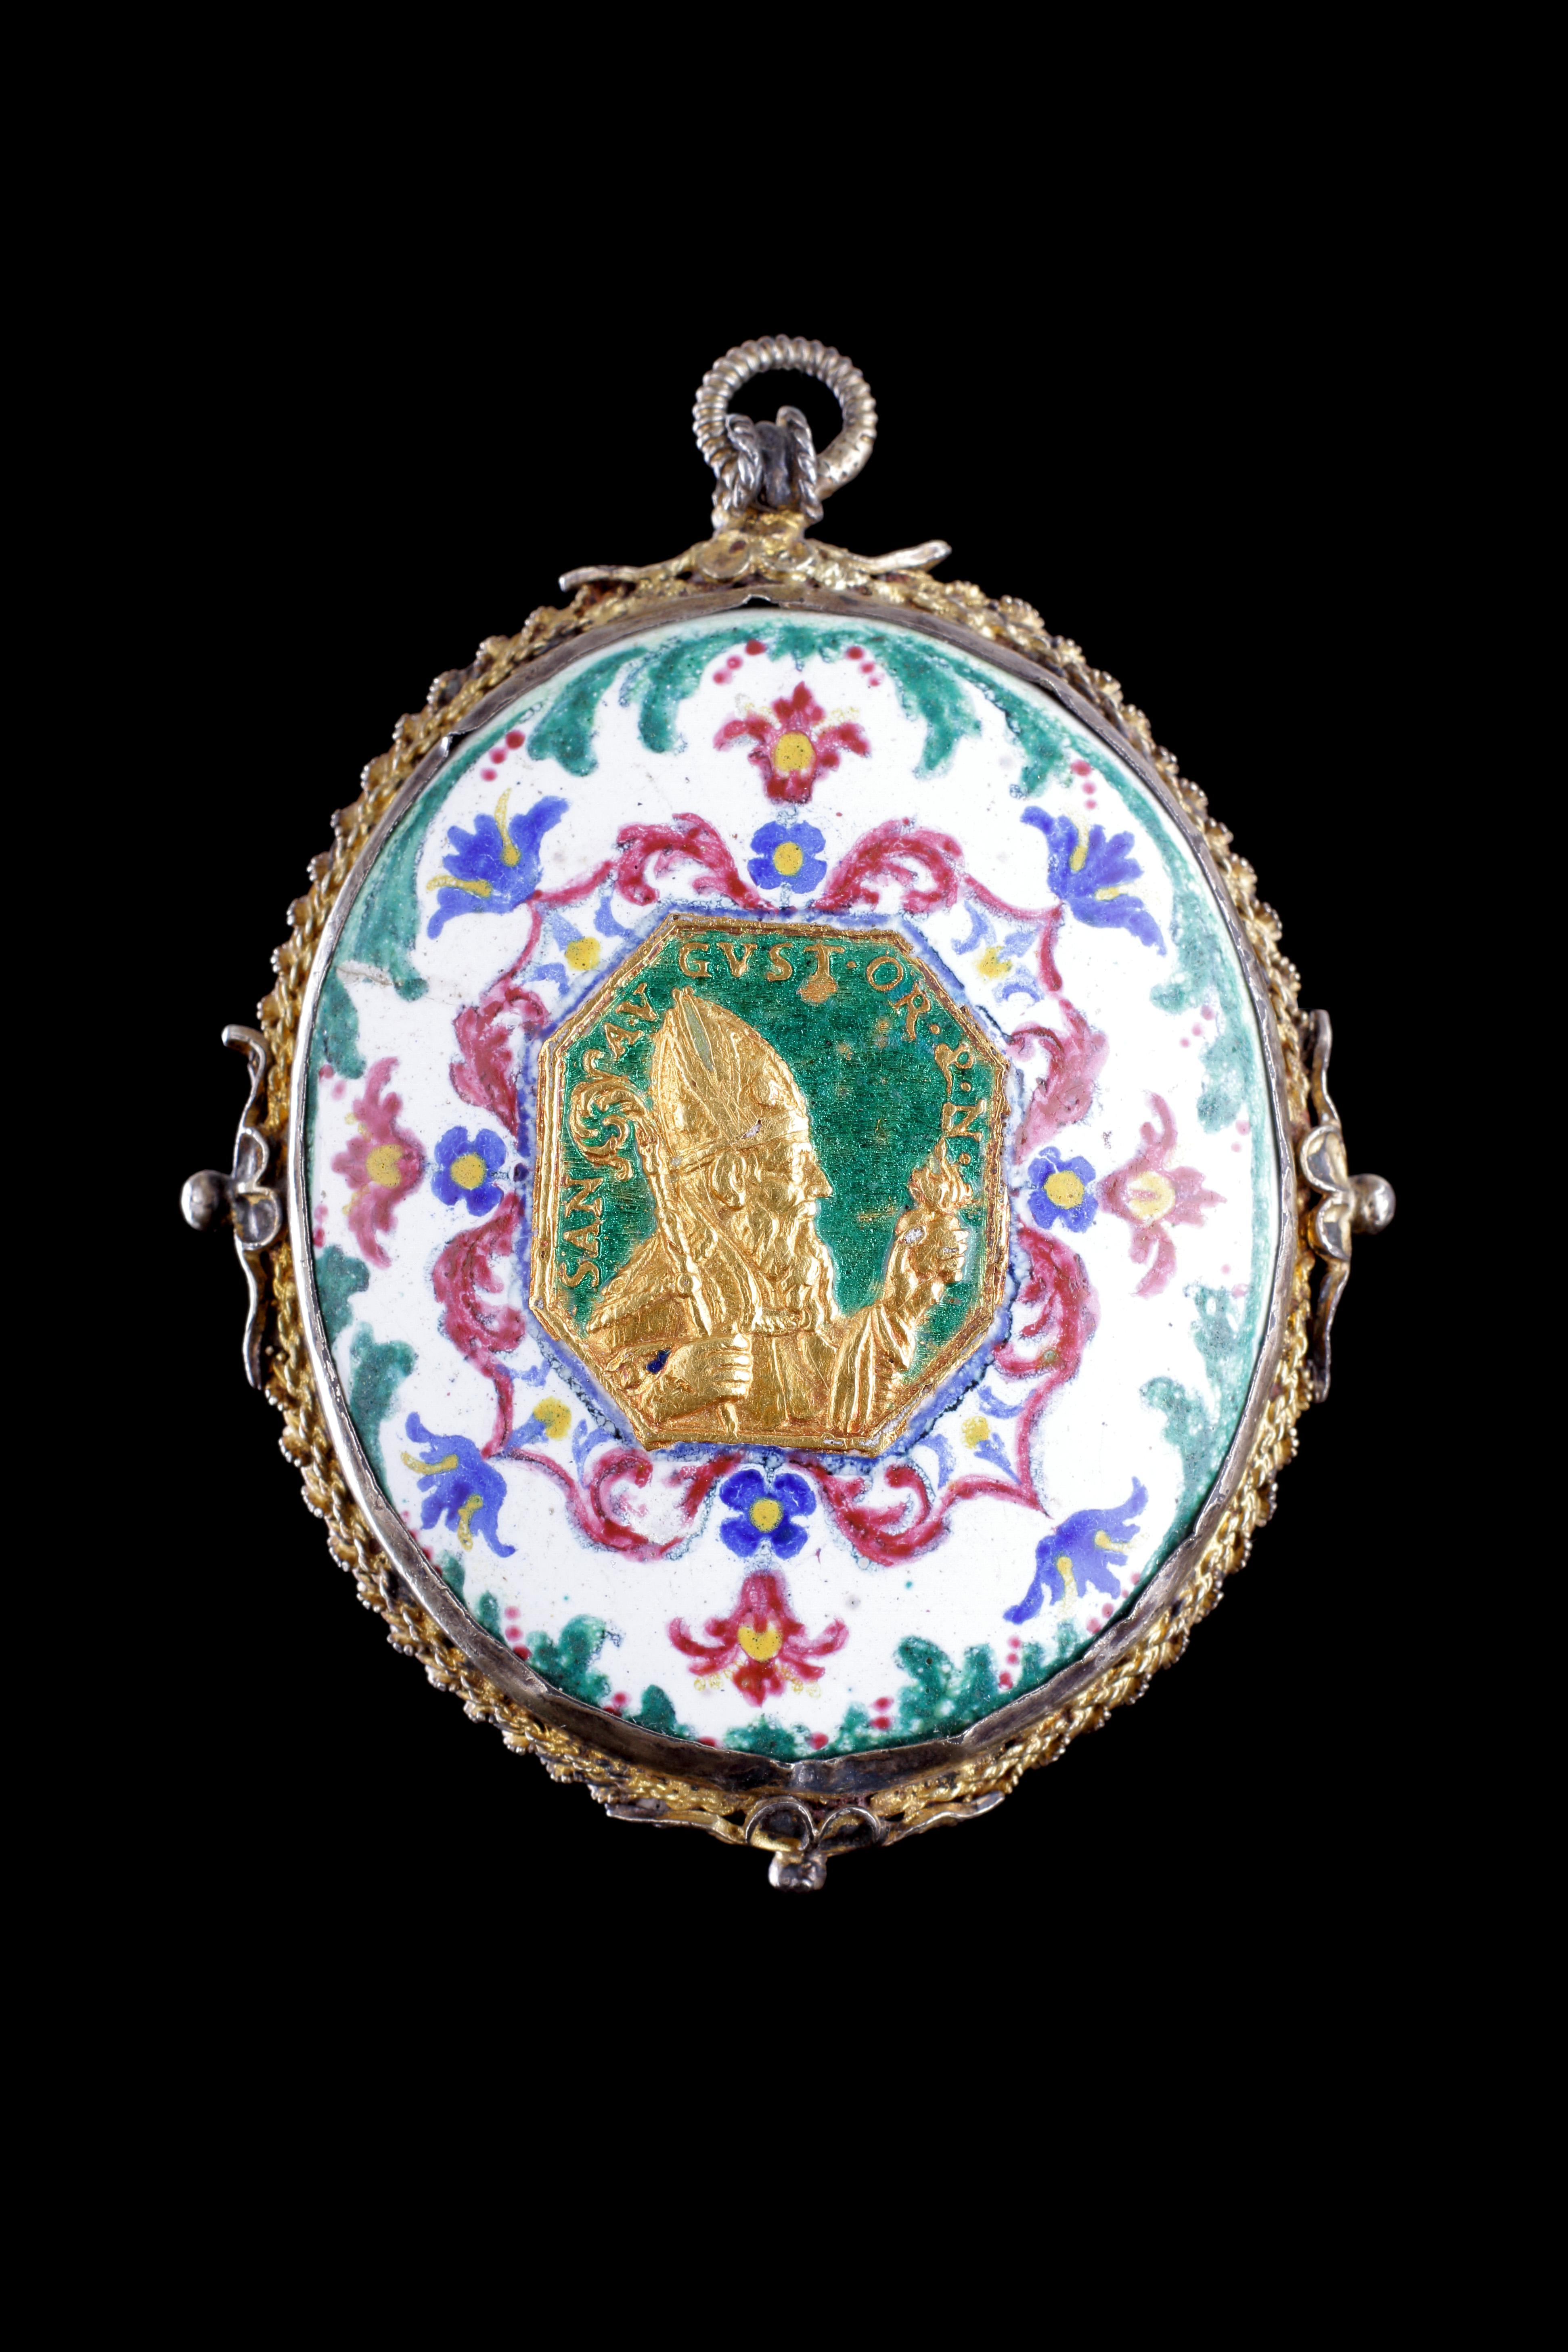 A Rare Berlin Silver Gilt Mounted Rock Crystal and Enamel Pendant 
With a wax ‘Agnus Dei’ oval relief to the reverse
Dated 1734 
Attributed to the Fromery workshop (Berlin 1685 - 1738) 
Copper, Enamel, Silver, Gilt, Wax, Rock Crystal 
German
18th